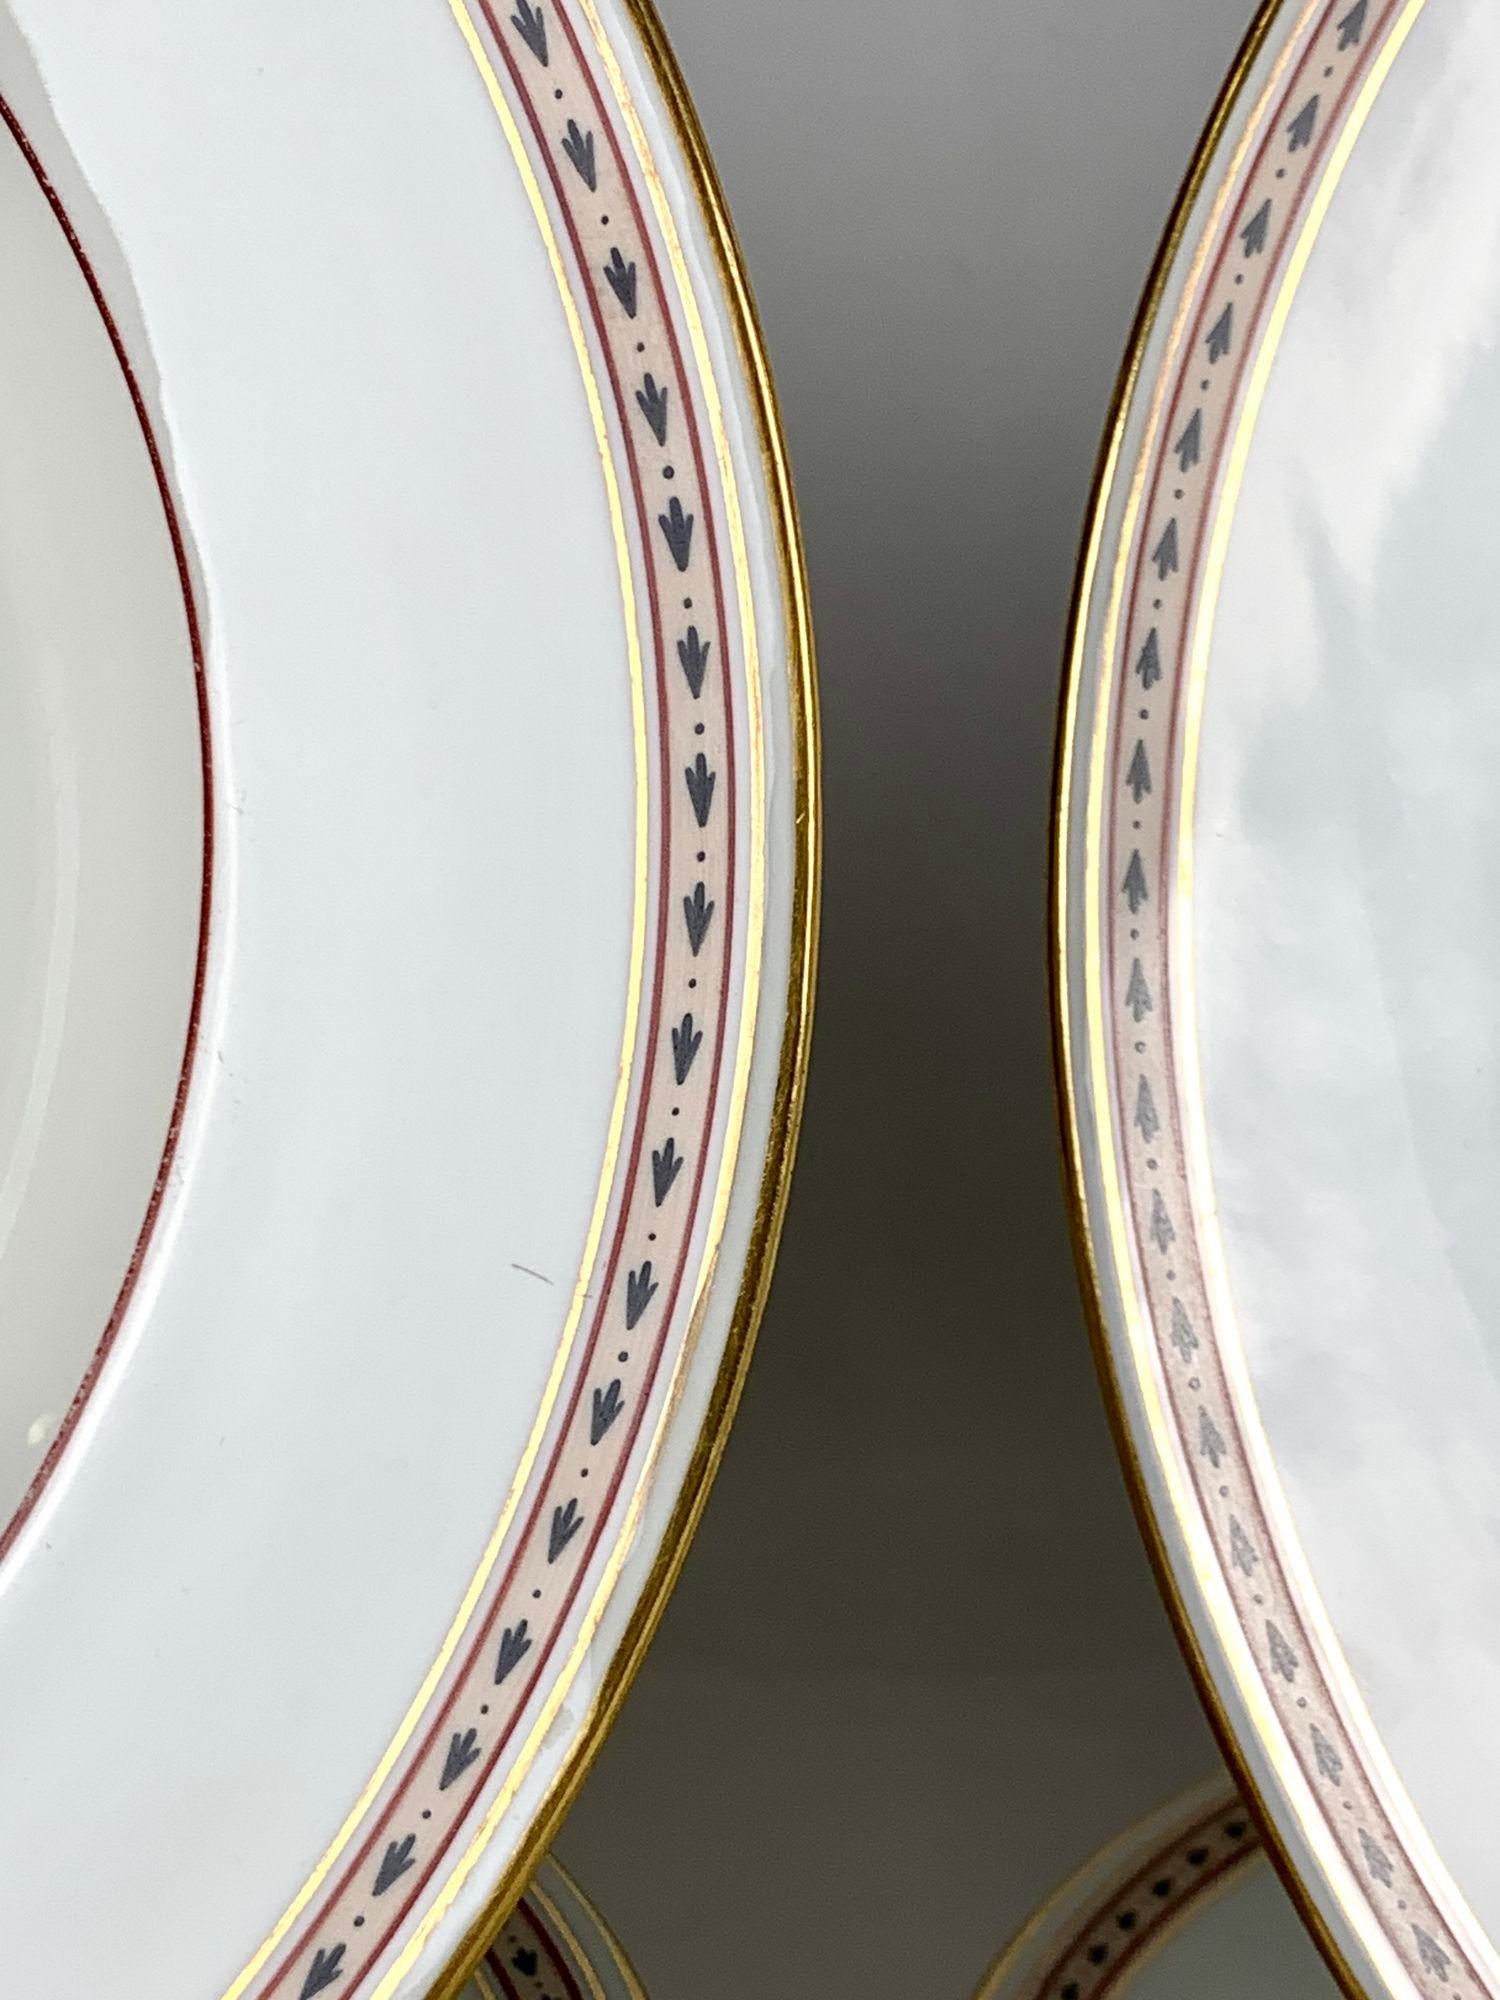 This lovely set of hand painted 18th-century Imperial Vienna Porcelain dishes features four dinner dishes, four soup/pasta dishes,
and a pair of chargers for serving.
The decoration is elegant.
Along the edge, we see a band of black darts and dots